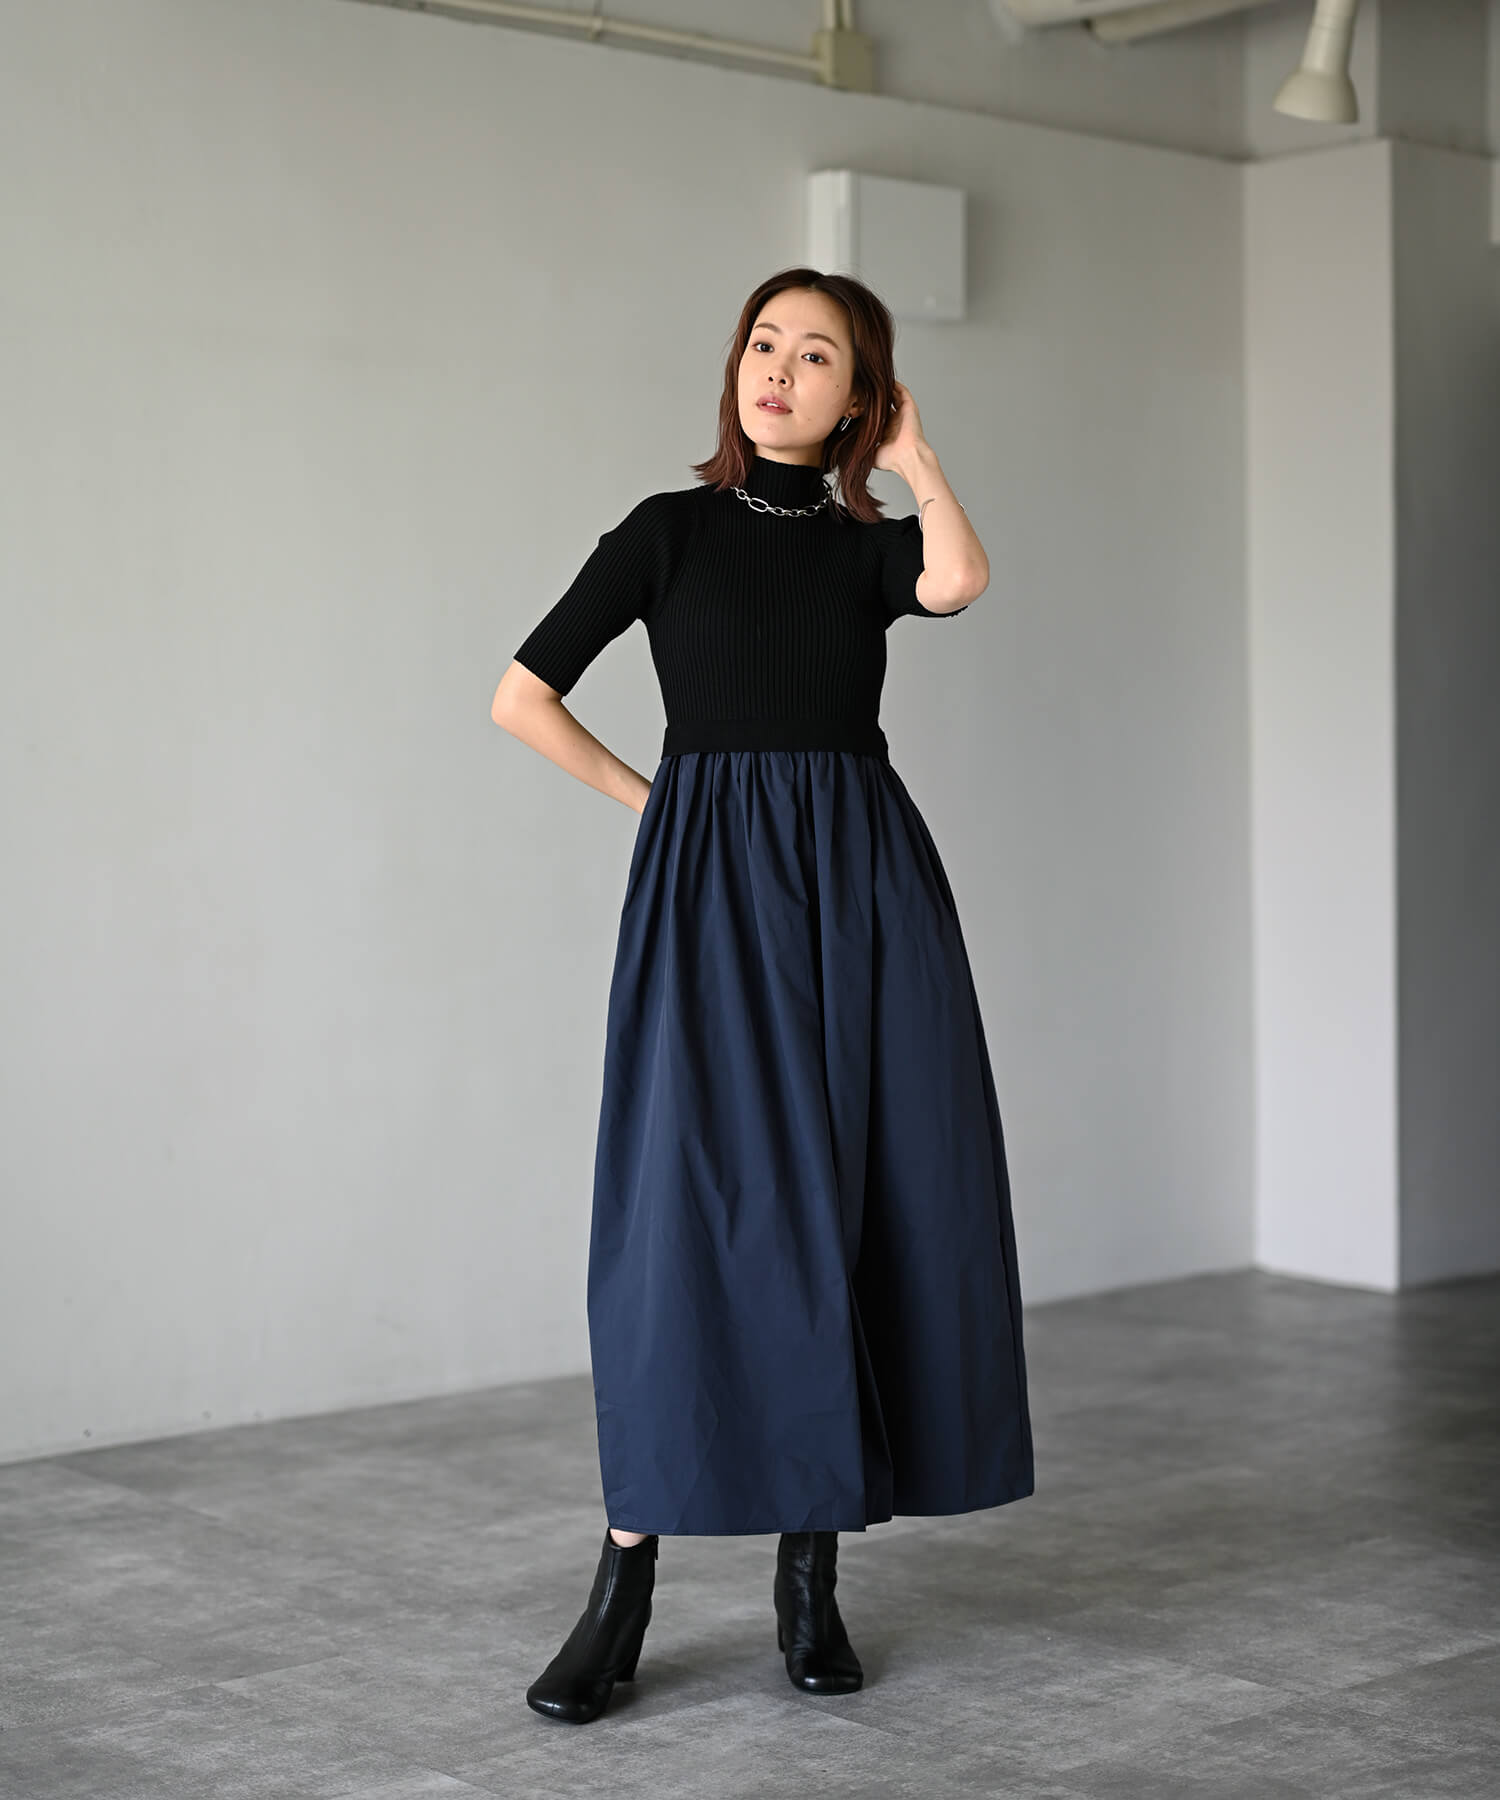 Rib knit combination flare dress | HERENCIA(ヘレンチア) | HERENCIA 